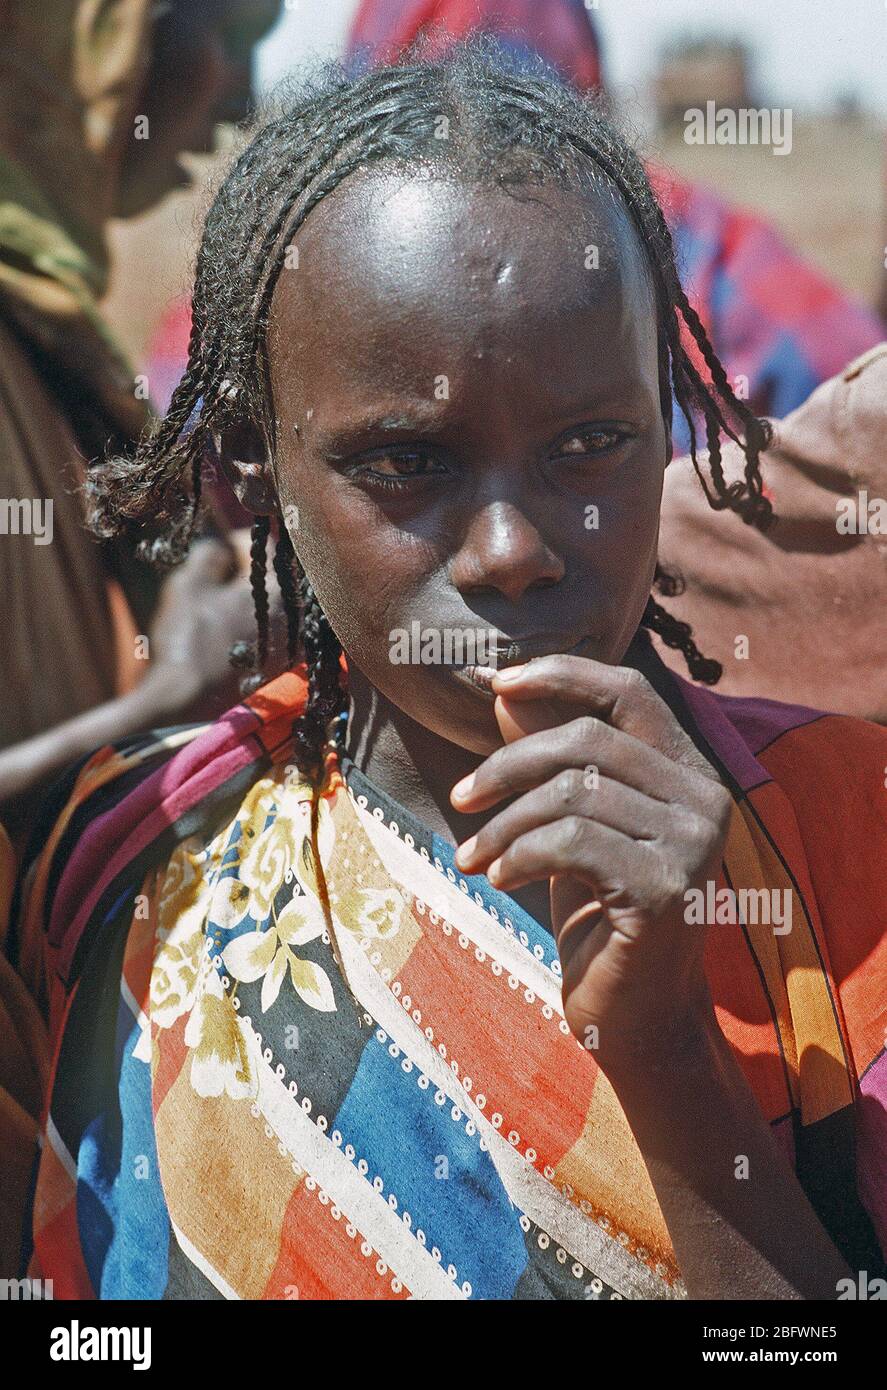 1993 - A Somali girl watches U.S. personnel during the multinational relief effort Operation Restore Hope. Stock Photo